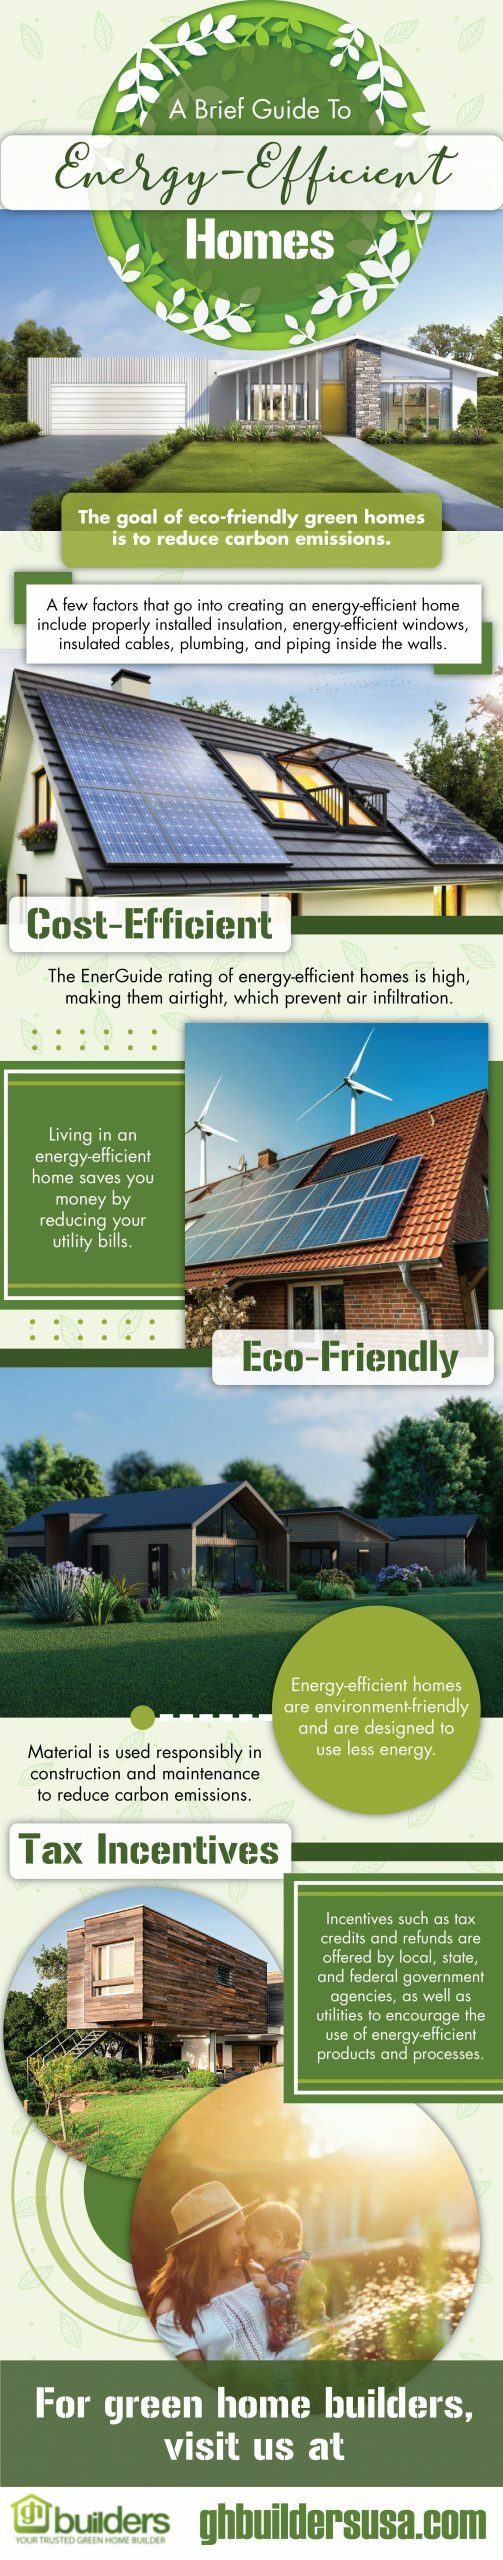 A Brief Guide to Energy Efficient Homes